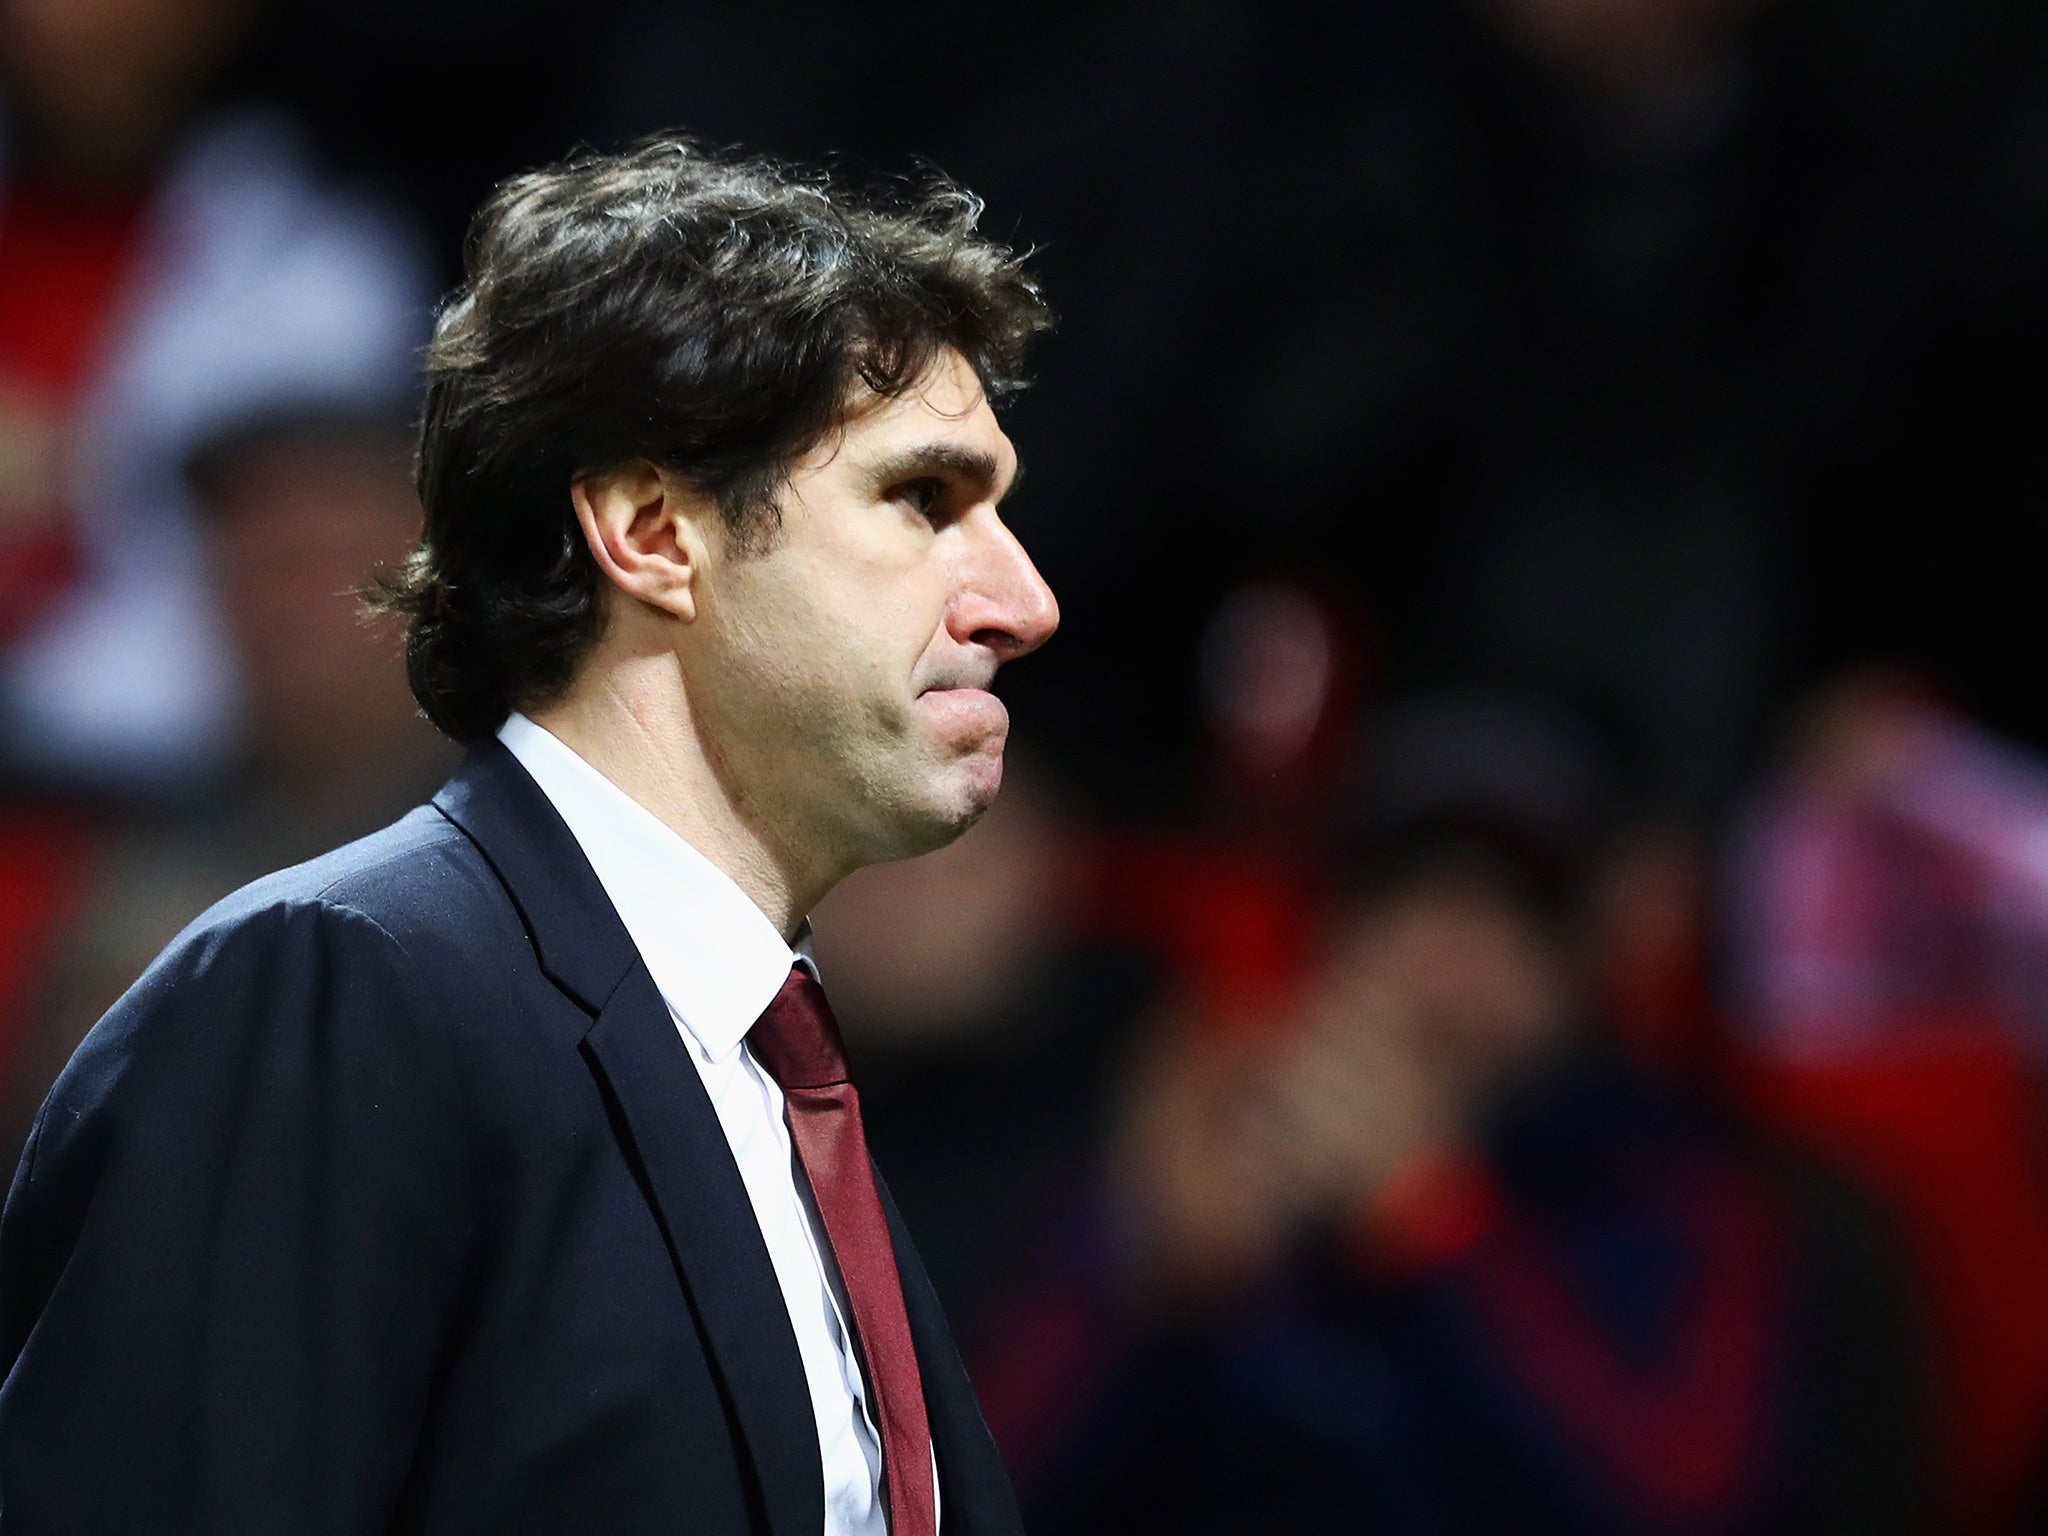 Karanka has been out of a job since being sacked by Middlesbrough